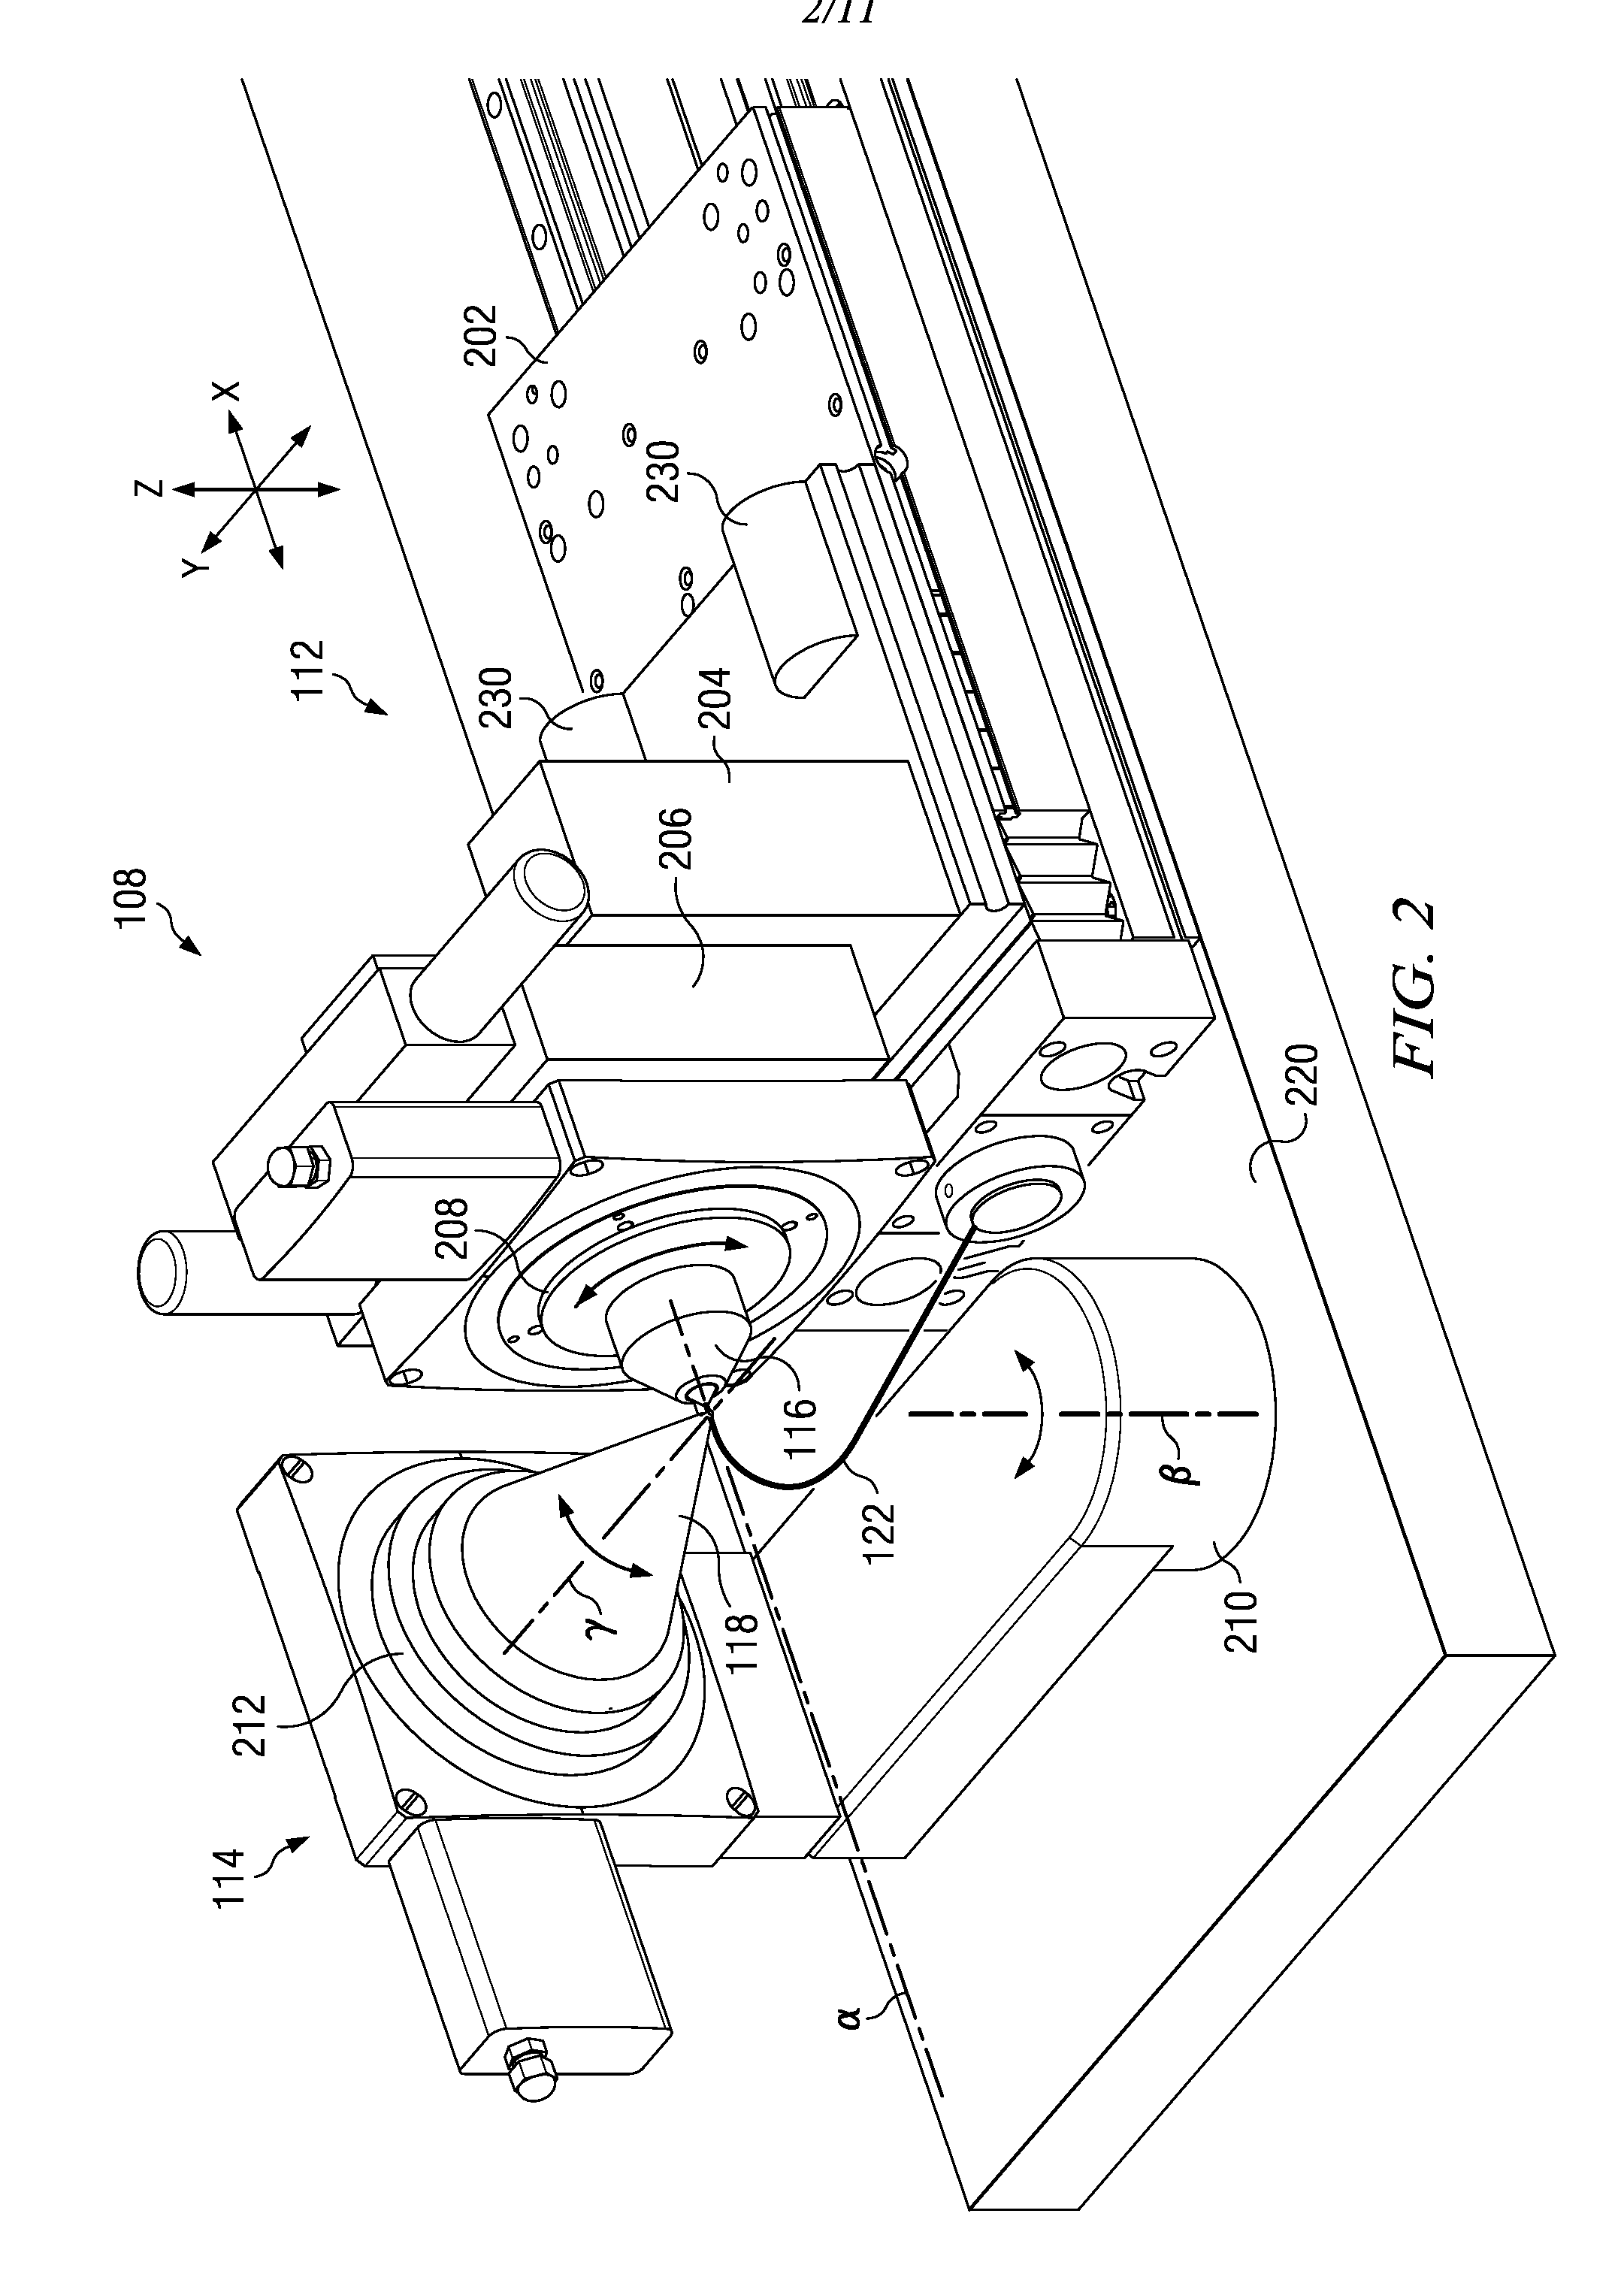 Apparatus and method for customized shaping of orthodontic archwires and other medical devices